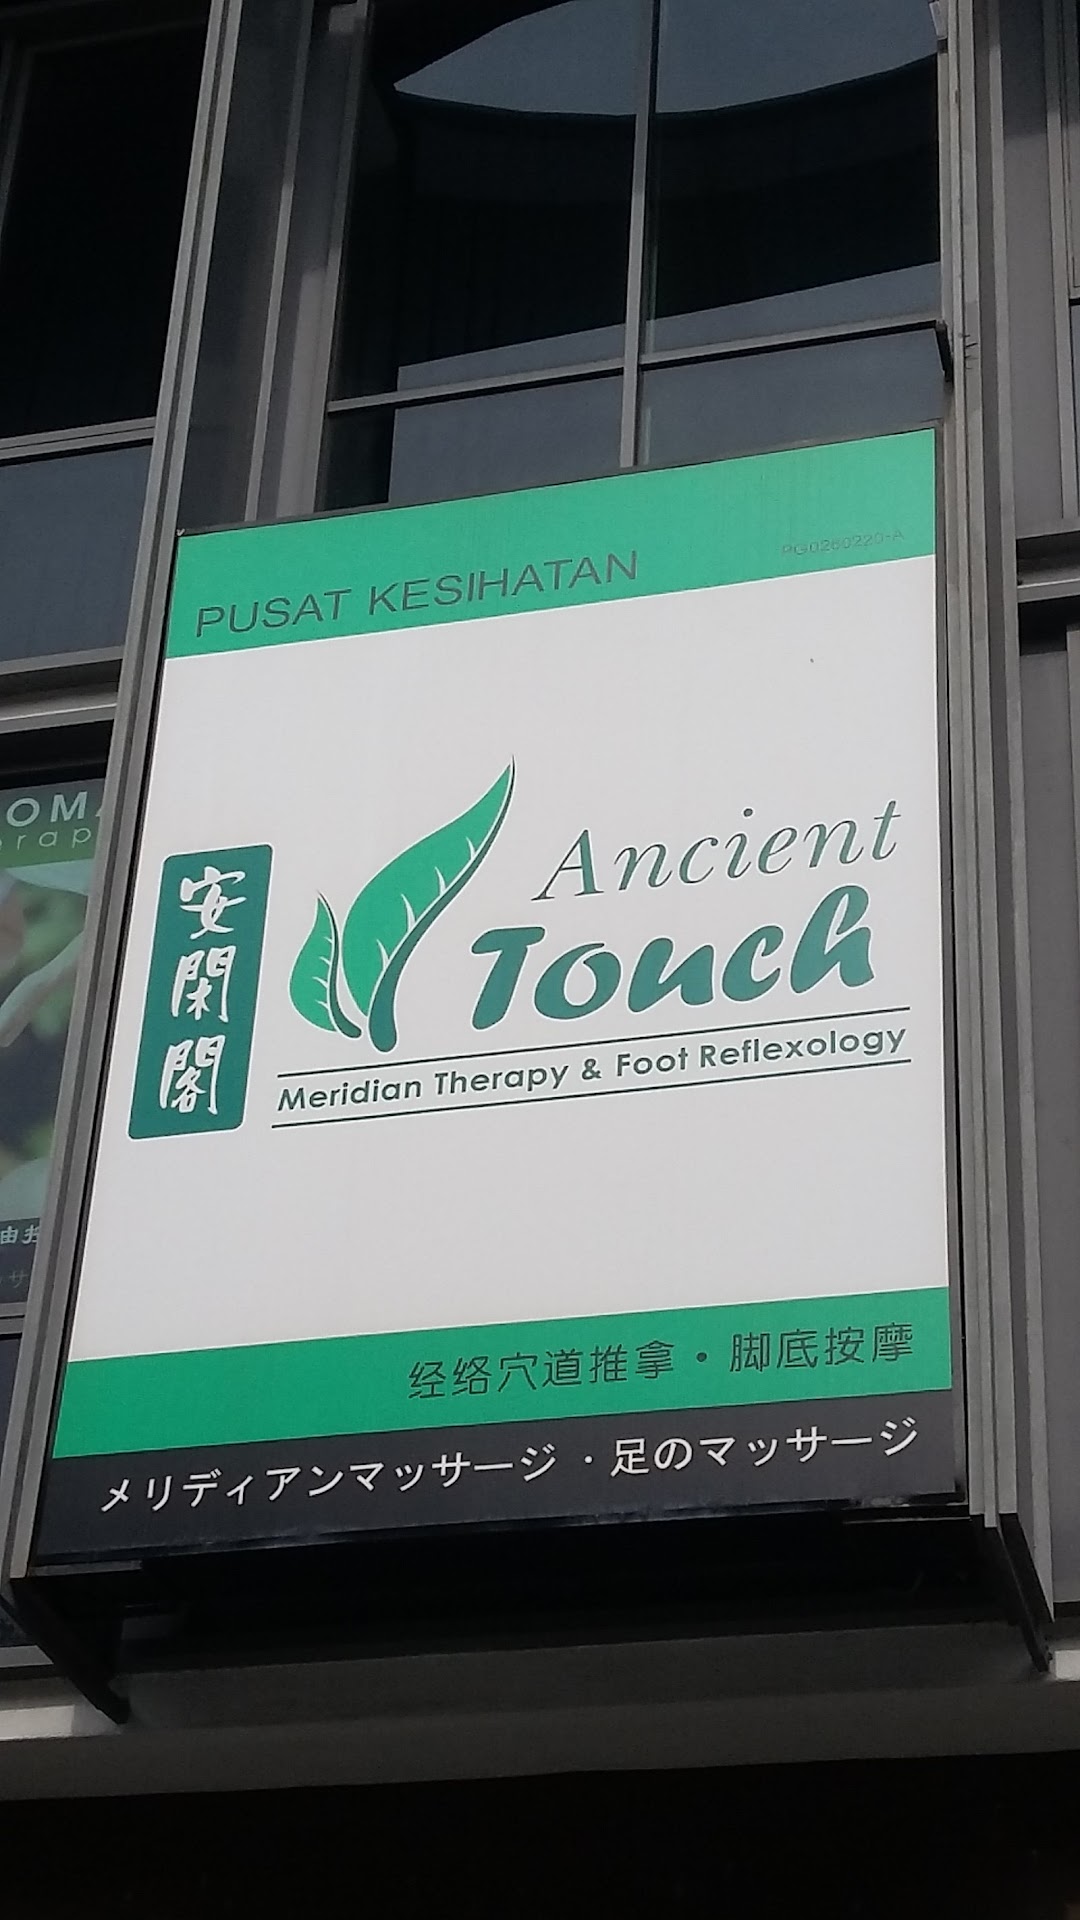 Ancient Touch (Meridian Therapy & Foot Reflexology)